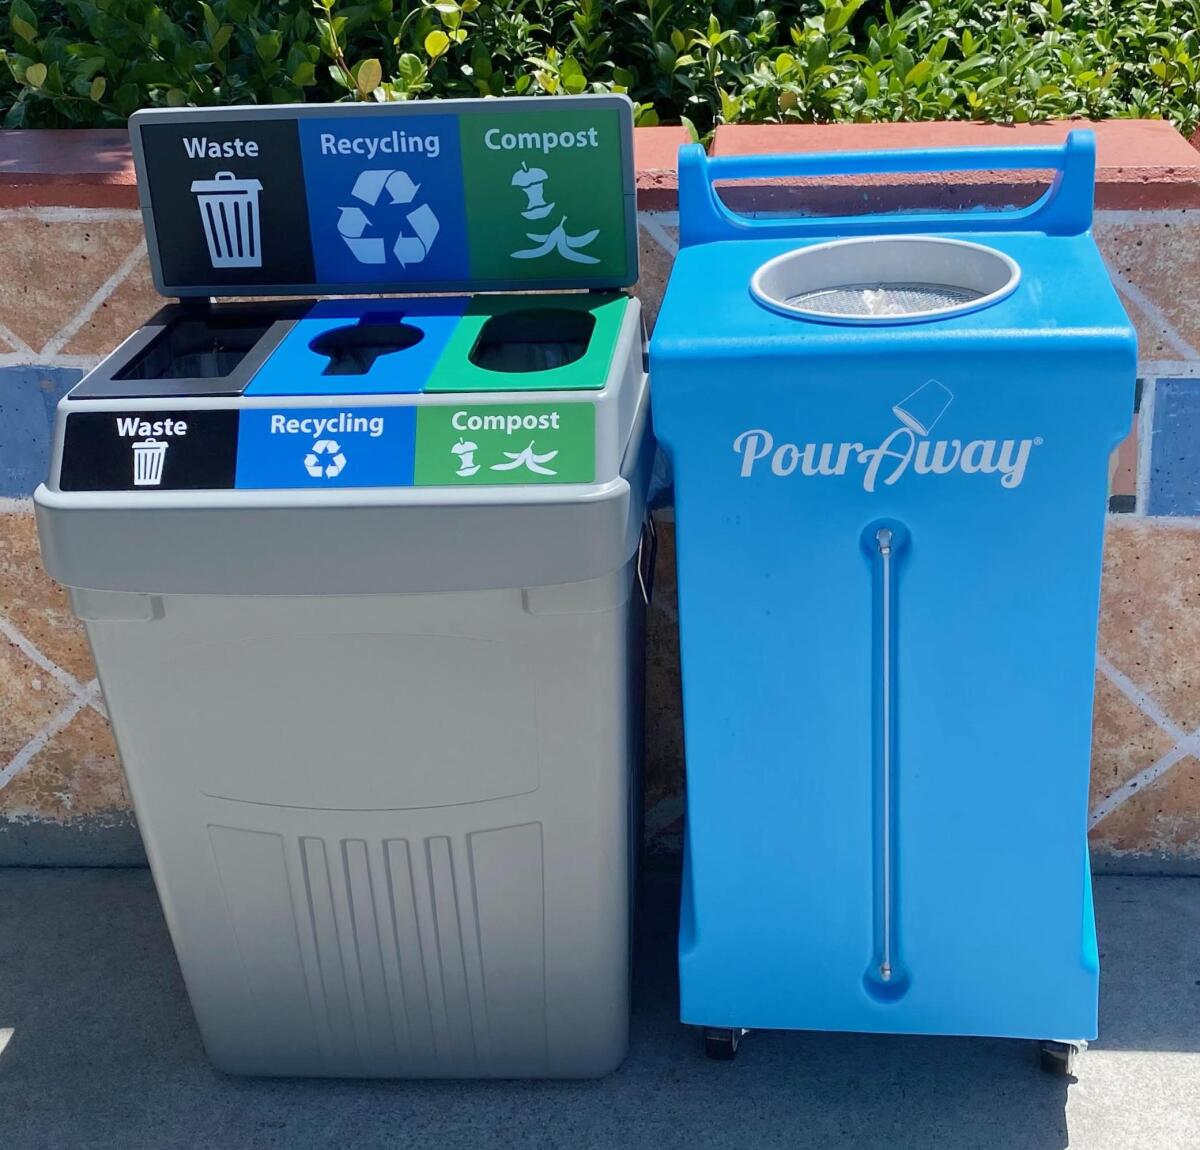 Recycling carts that sort trash into three categories are being installed at Poway Unified schools this fall.